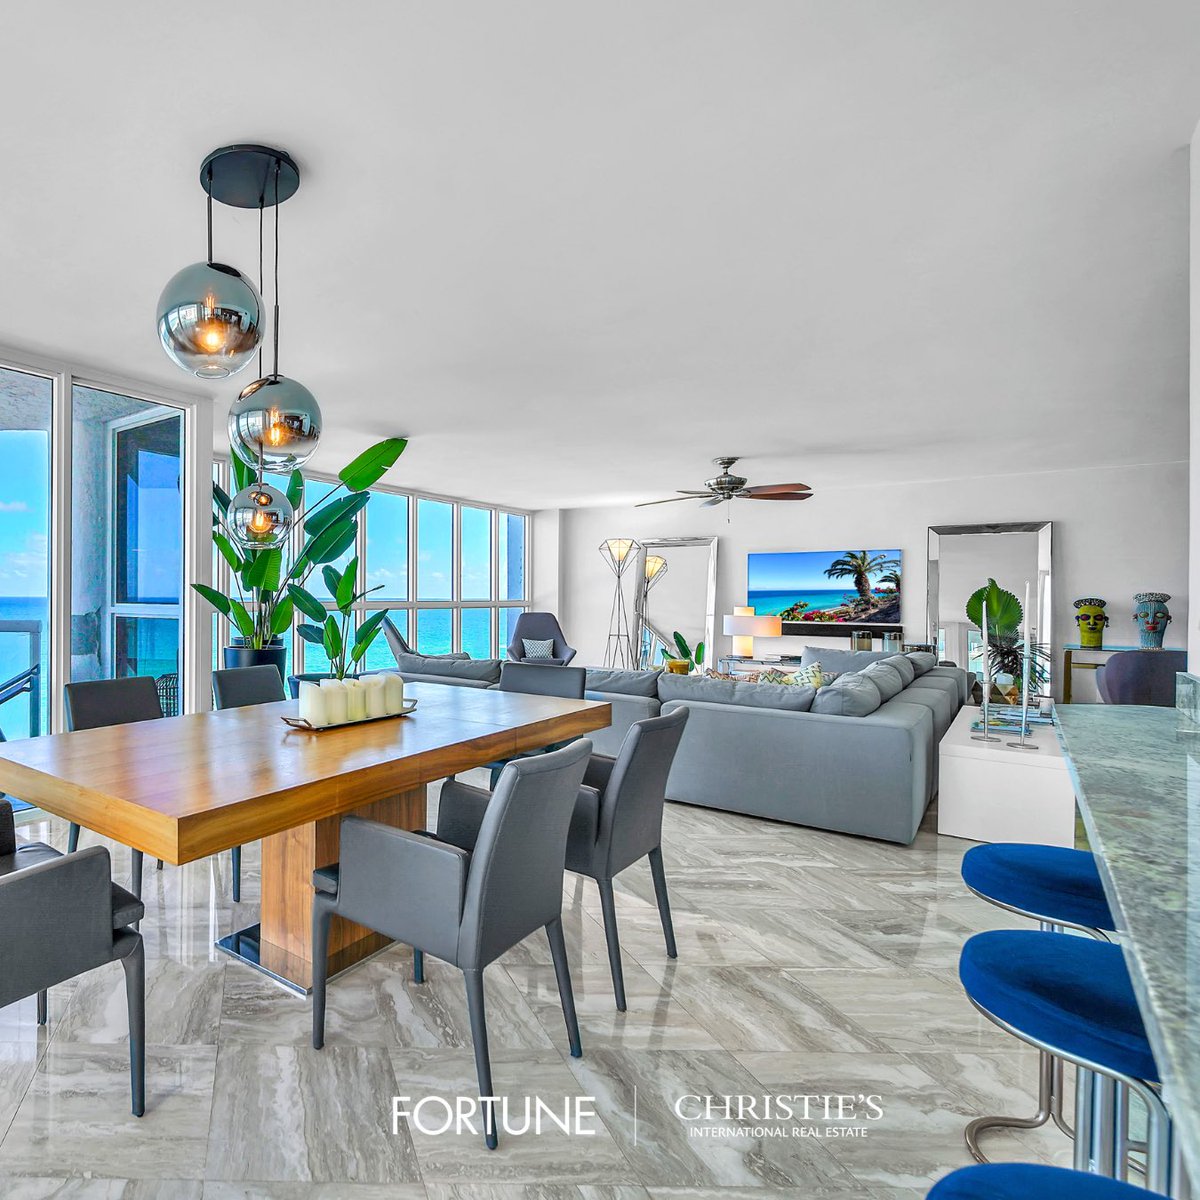 New Price, exclusive listing For Rent!✨✨✨ Beautiful Oceanfront At Its Finest! Exquisite Fully Furnished 2 Beds + 3 Baths! New Impact Windows, Floor-to-ceiling With Direct Ocean Views, & All Rooms With Balcony Access!